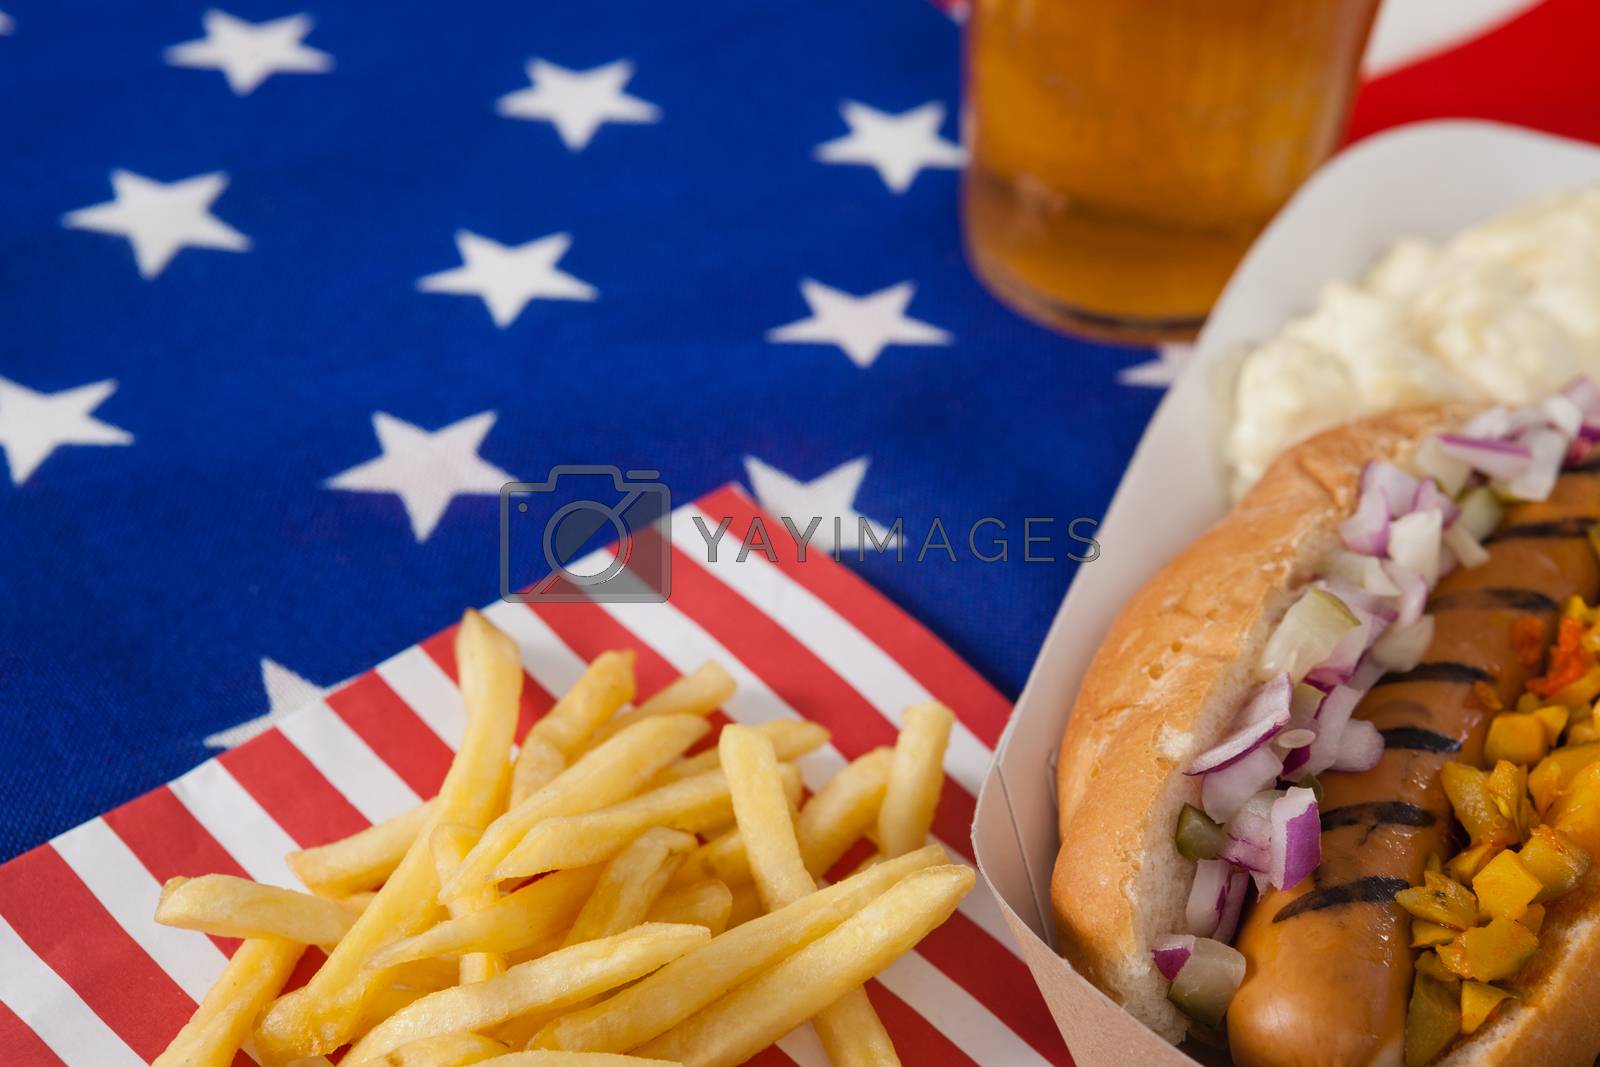 Royalty free image of Hot dog and french fries on wooden tale by Wavebreakmedia